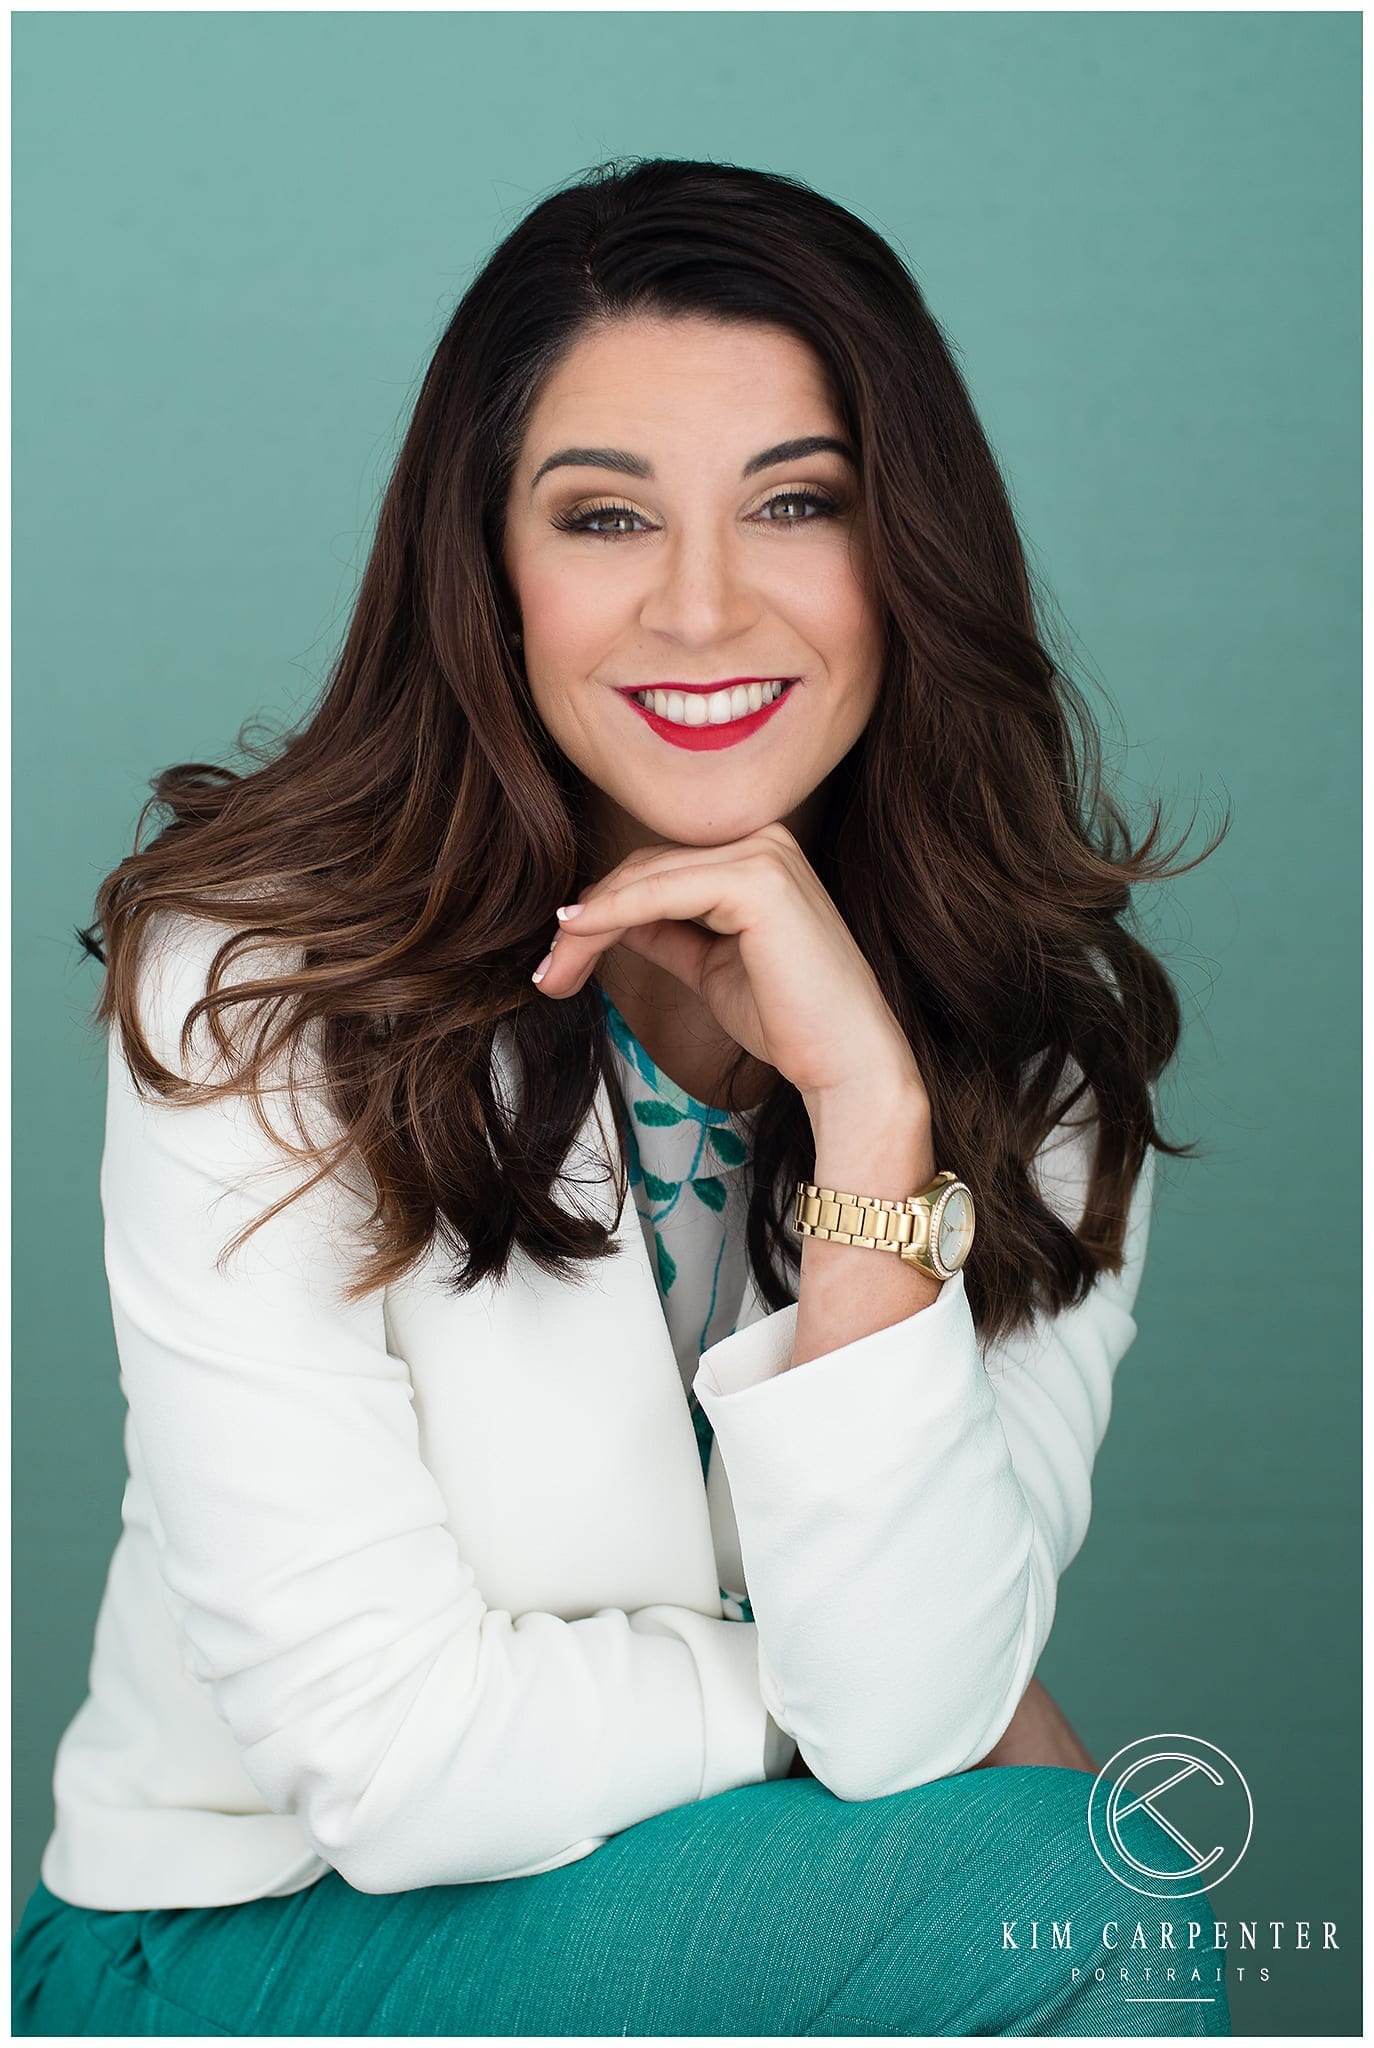 Lady wearing a white jacket and has a watch on her wrist. Lakeland Photographer, professional headshots